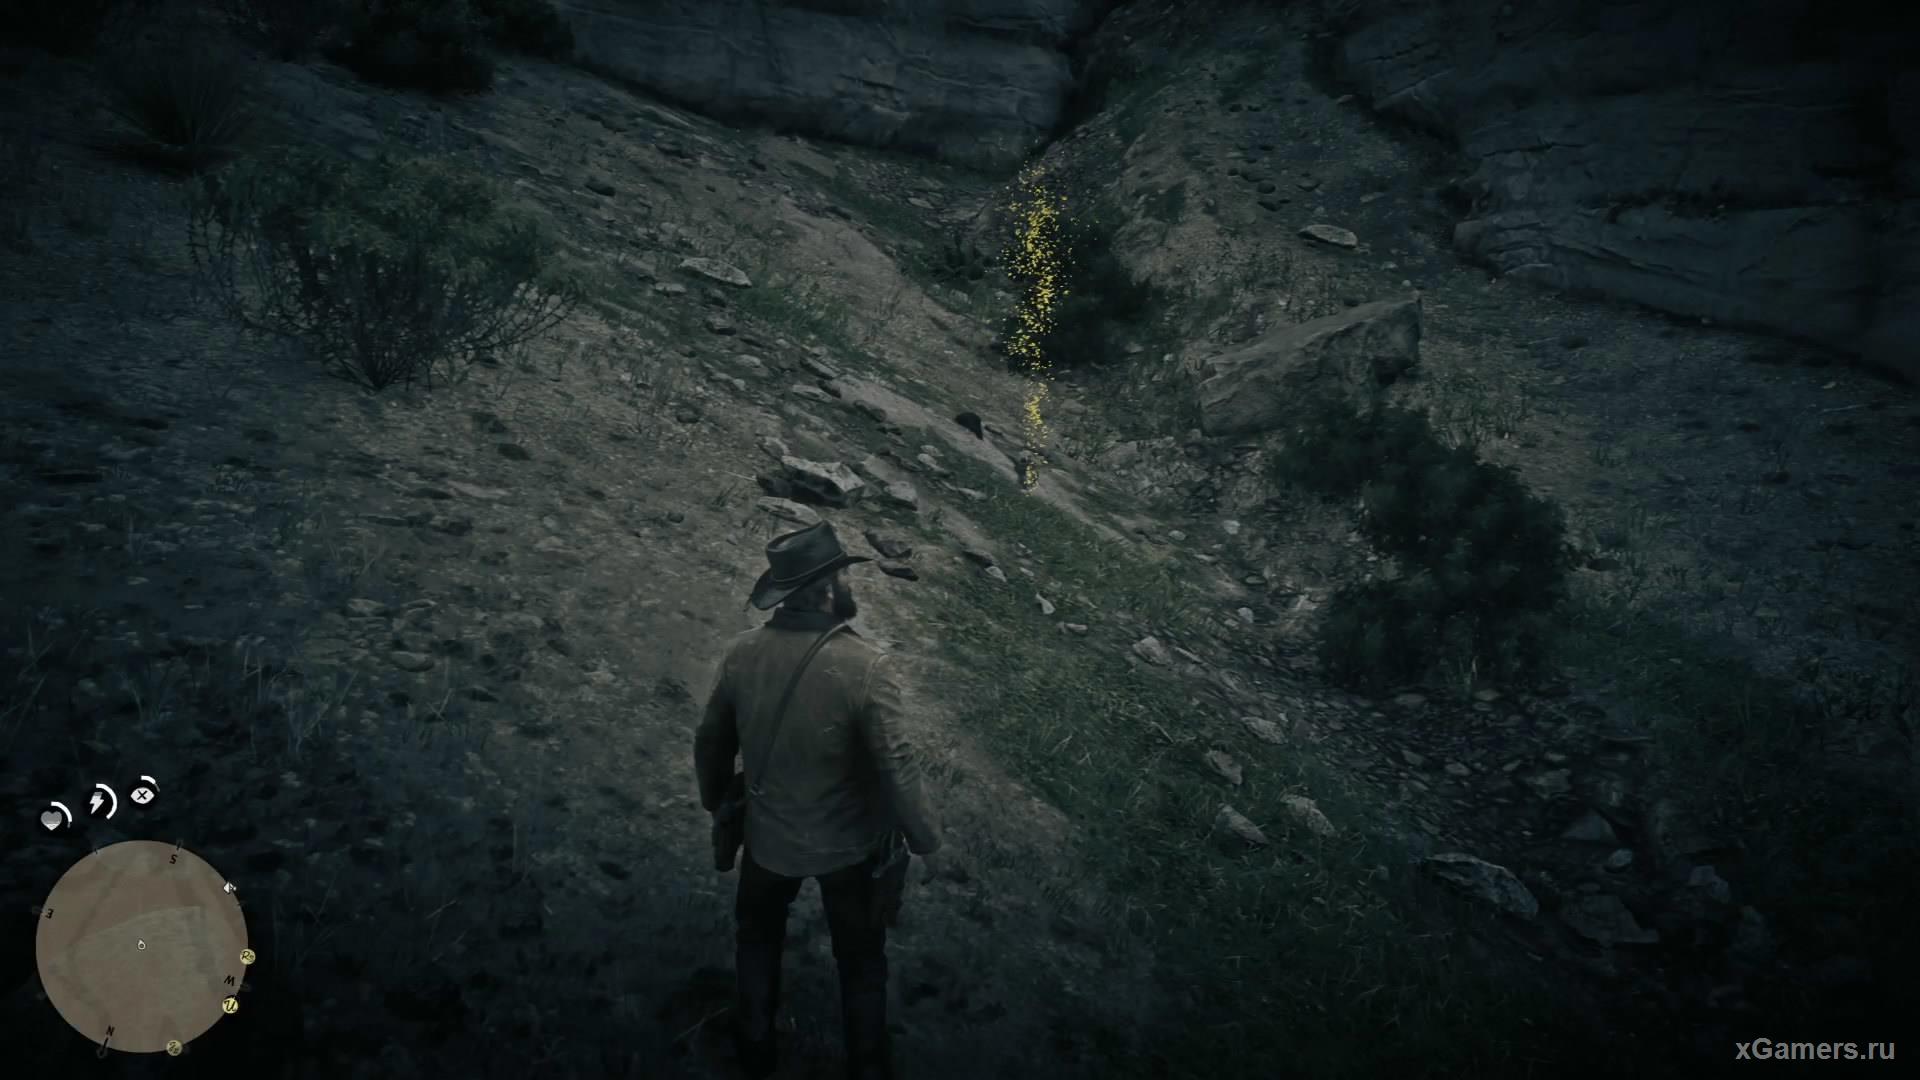 The second bone in the game Red Dead Redemption 2